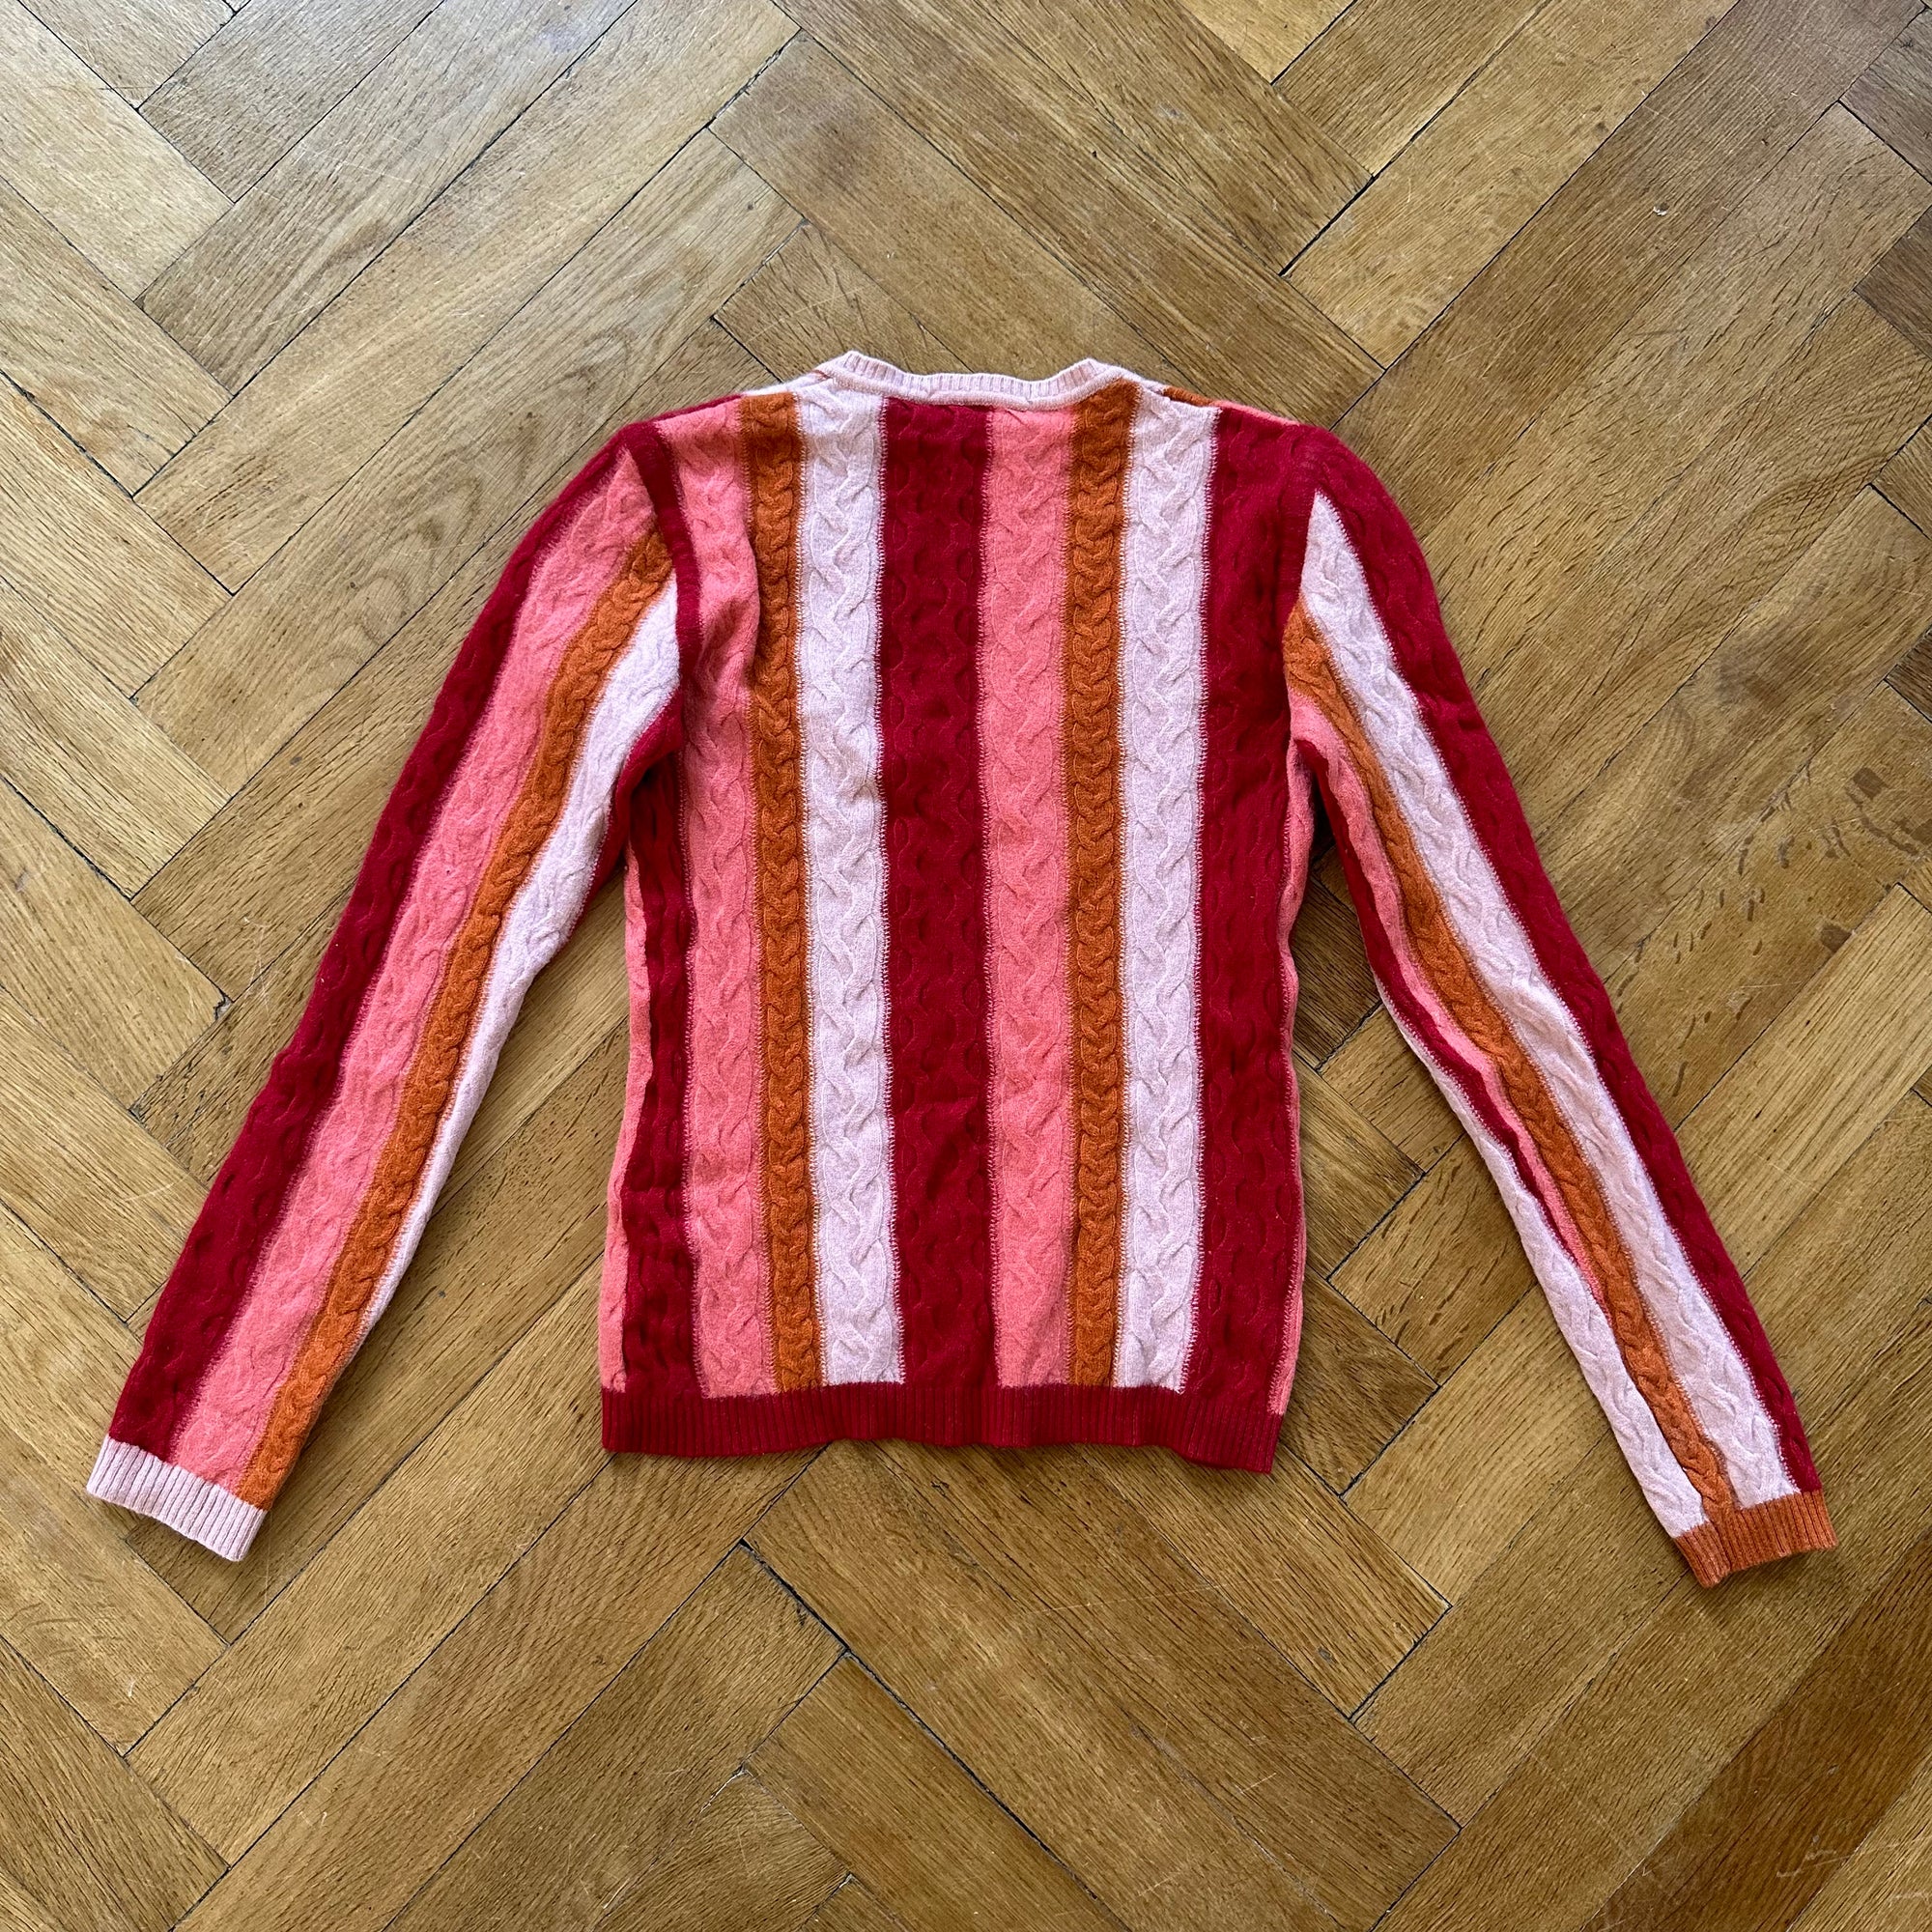 Christian Dior by John Galliano FW04 Striped Cable Knit Sweater